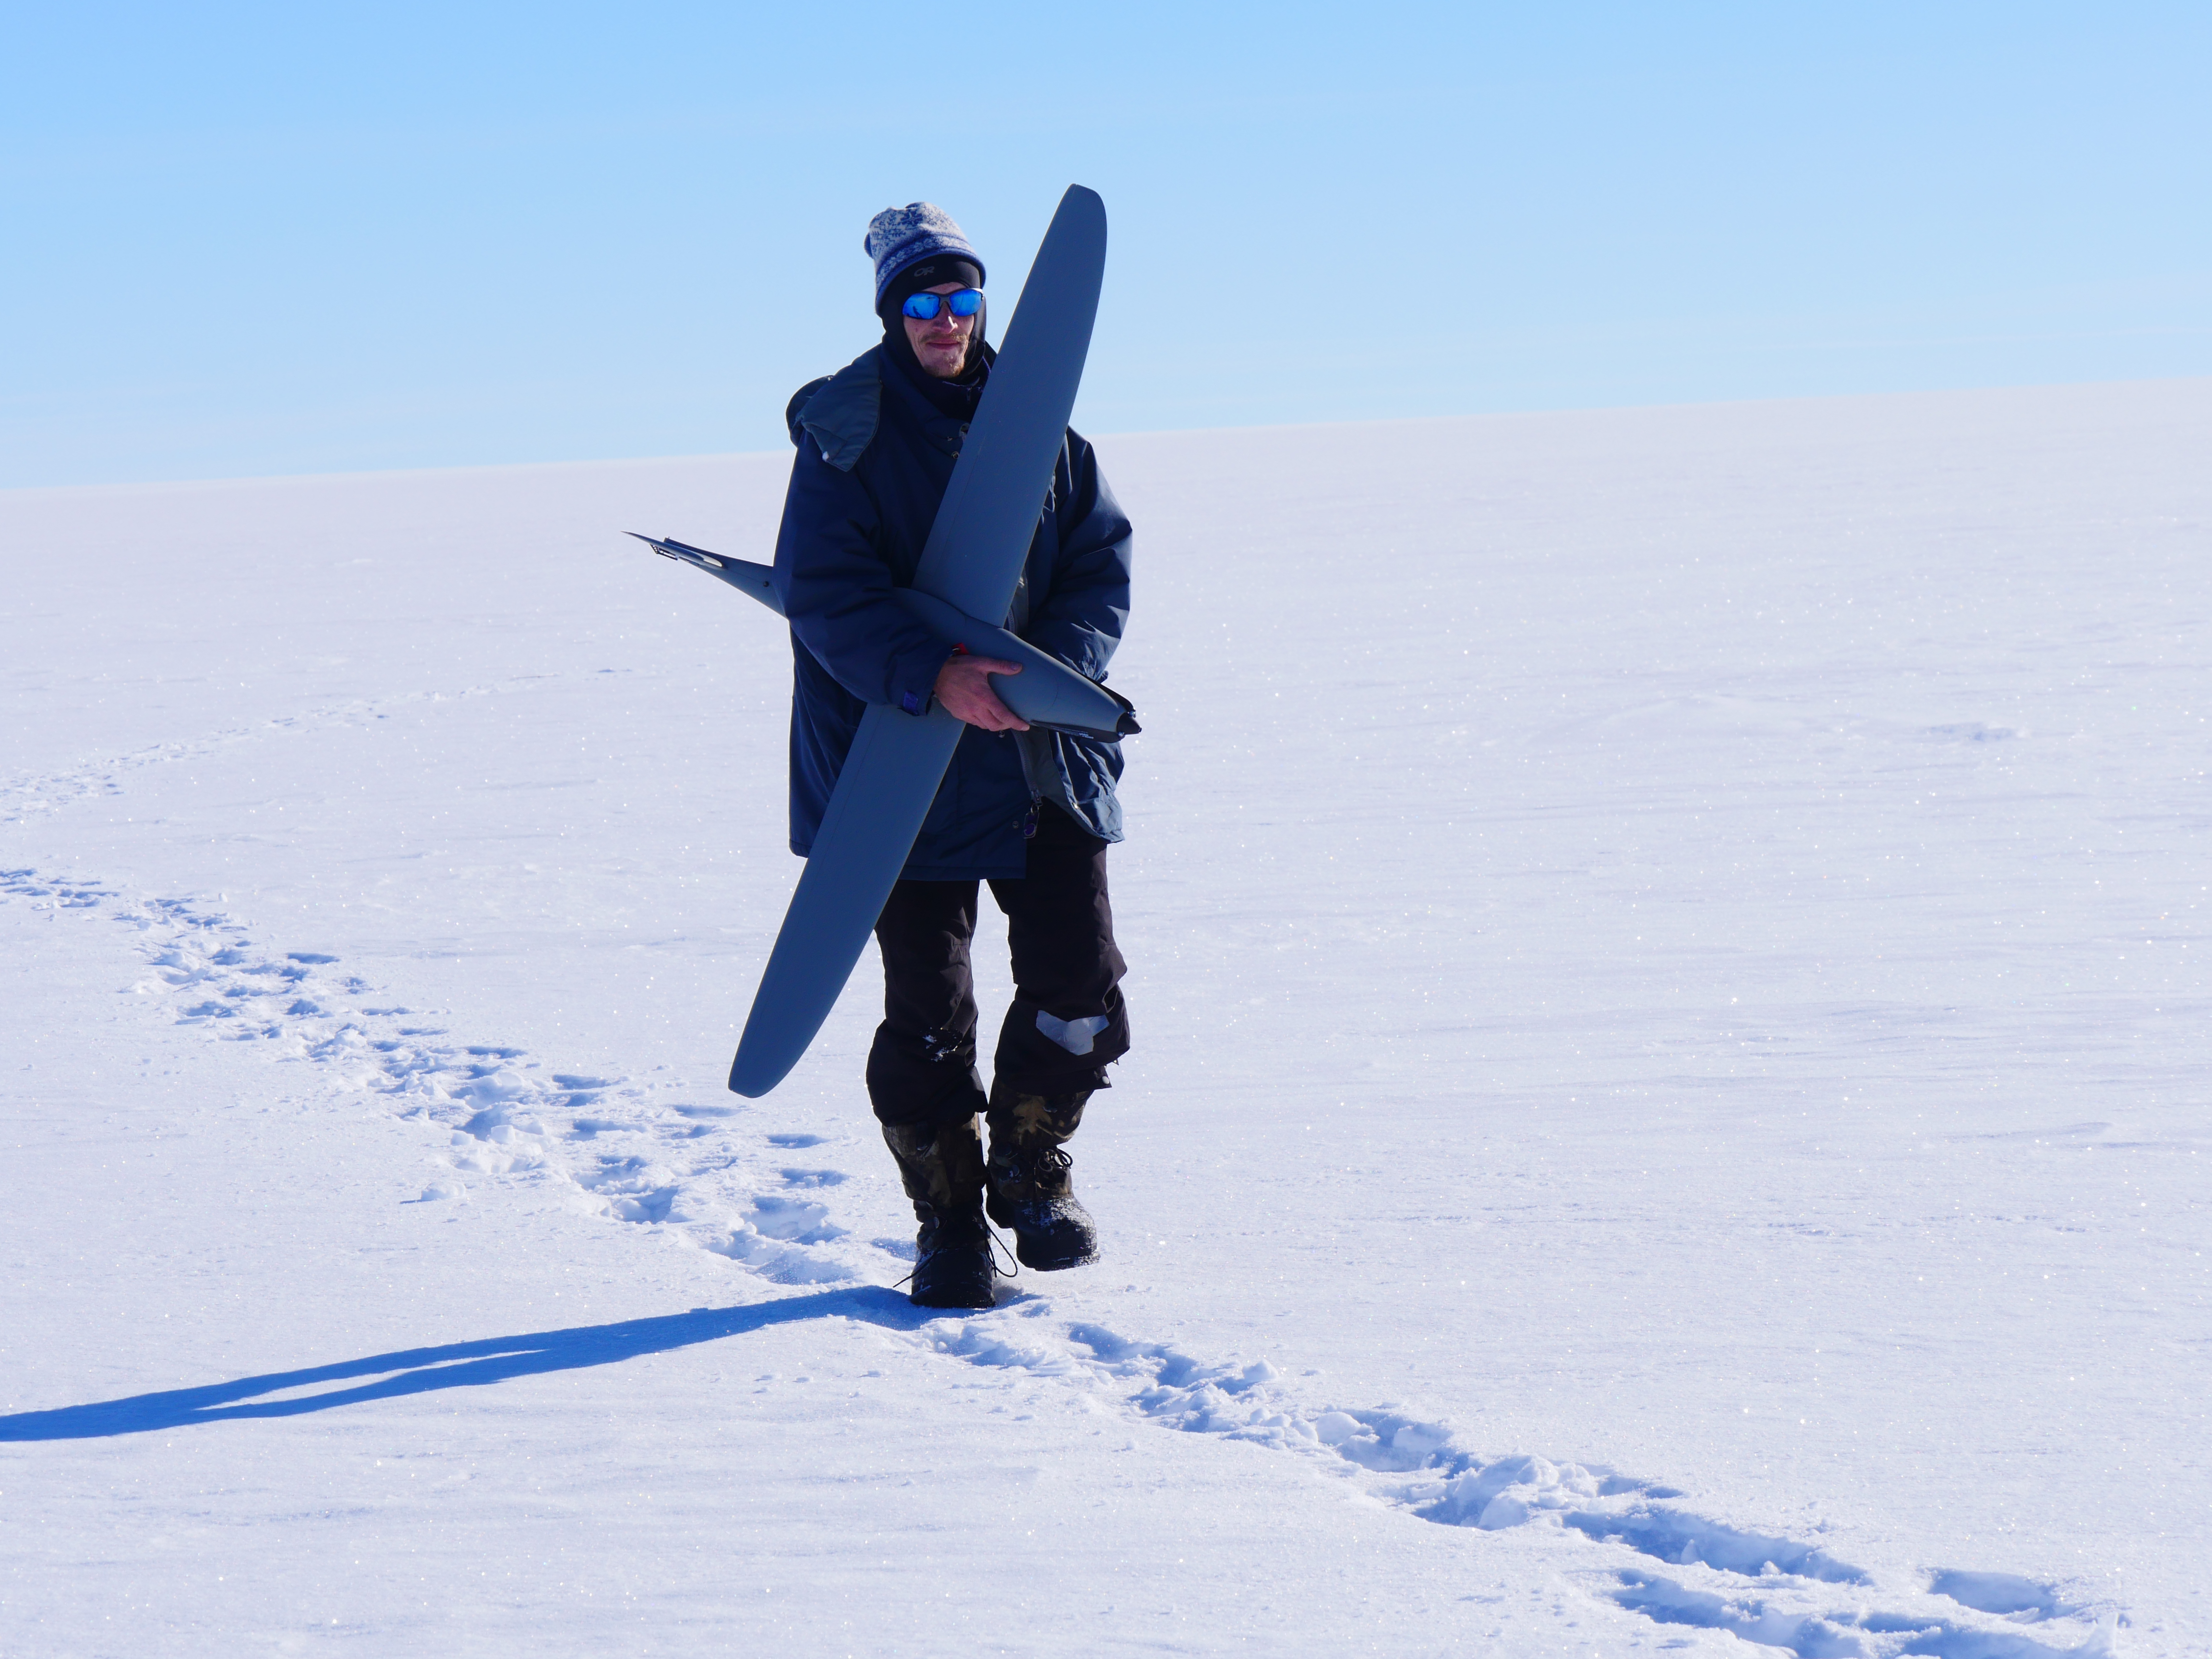 Aslak is walking the drone back after a successful measurement flight